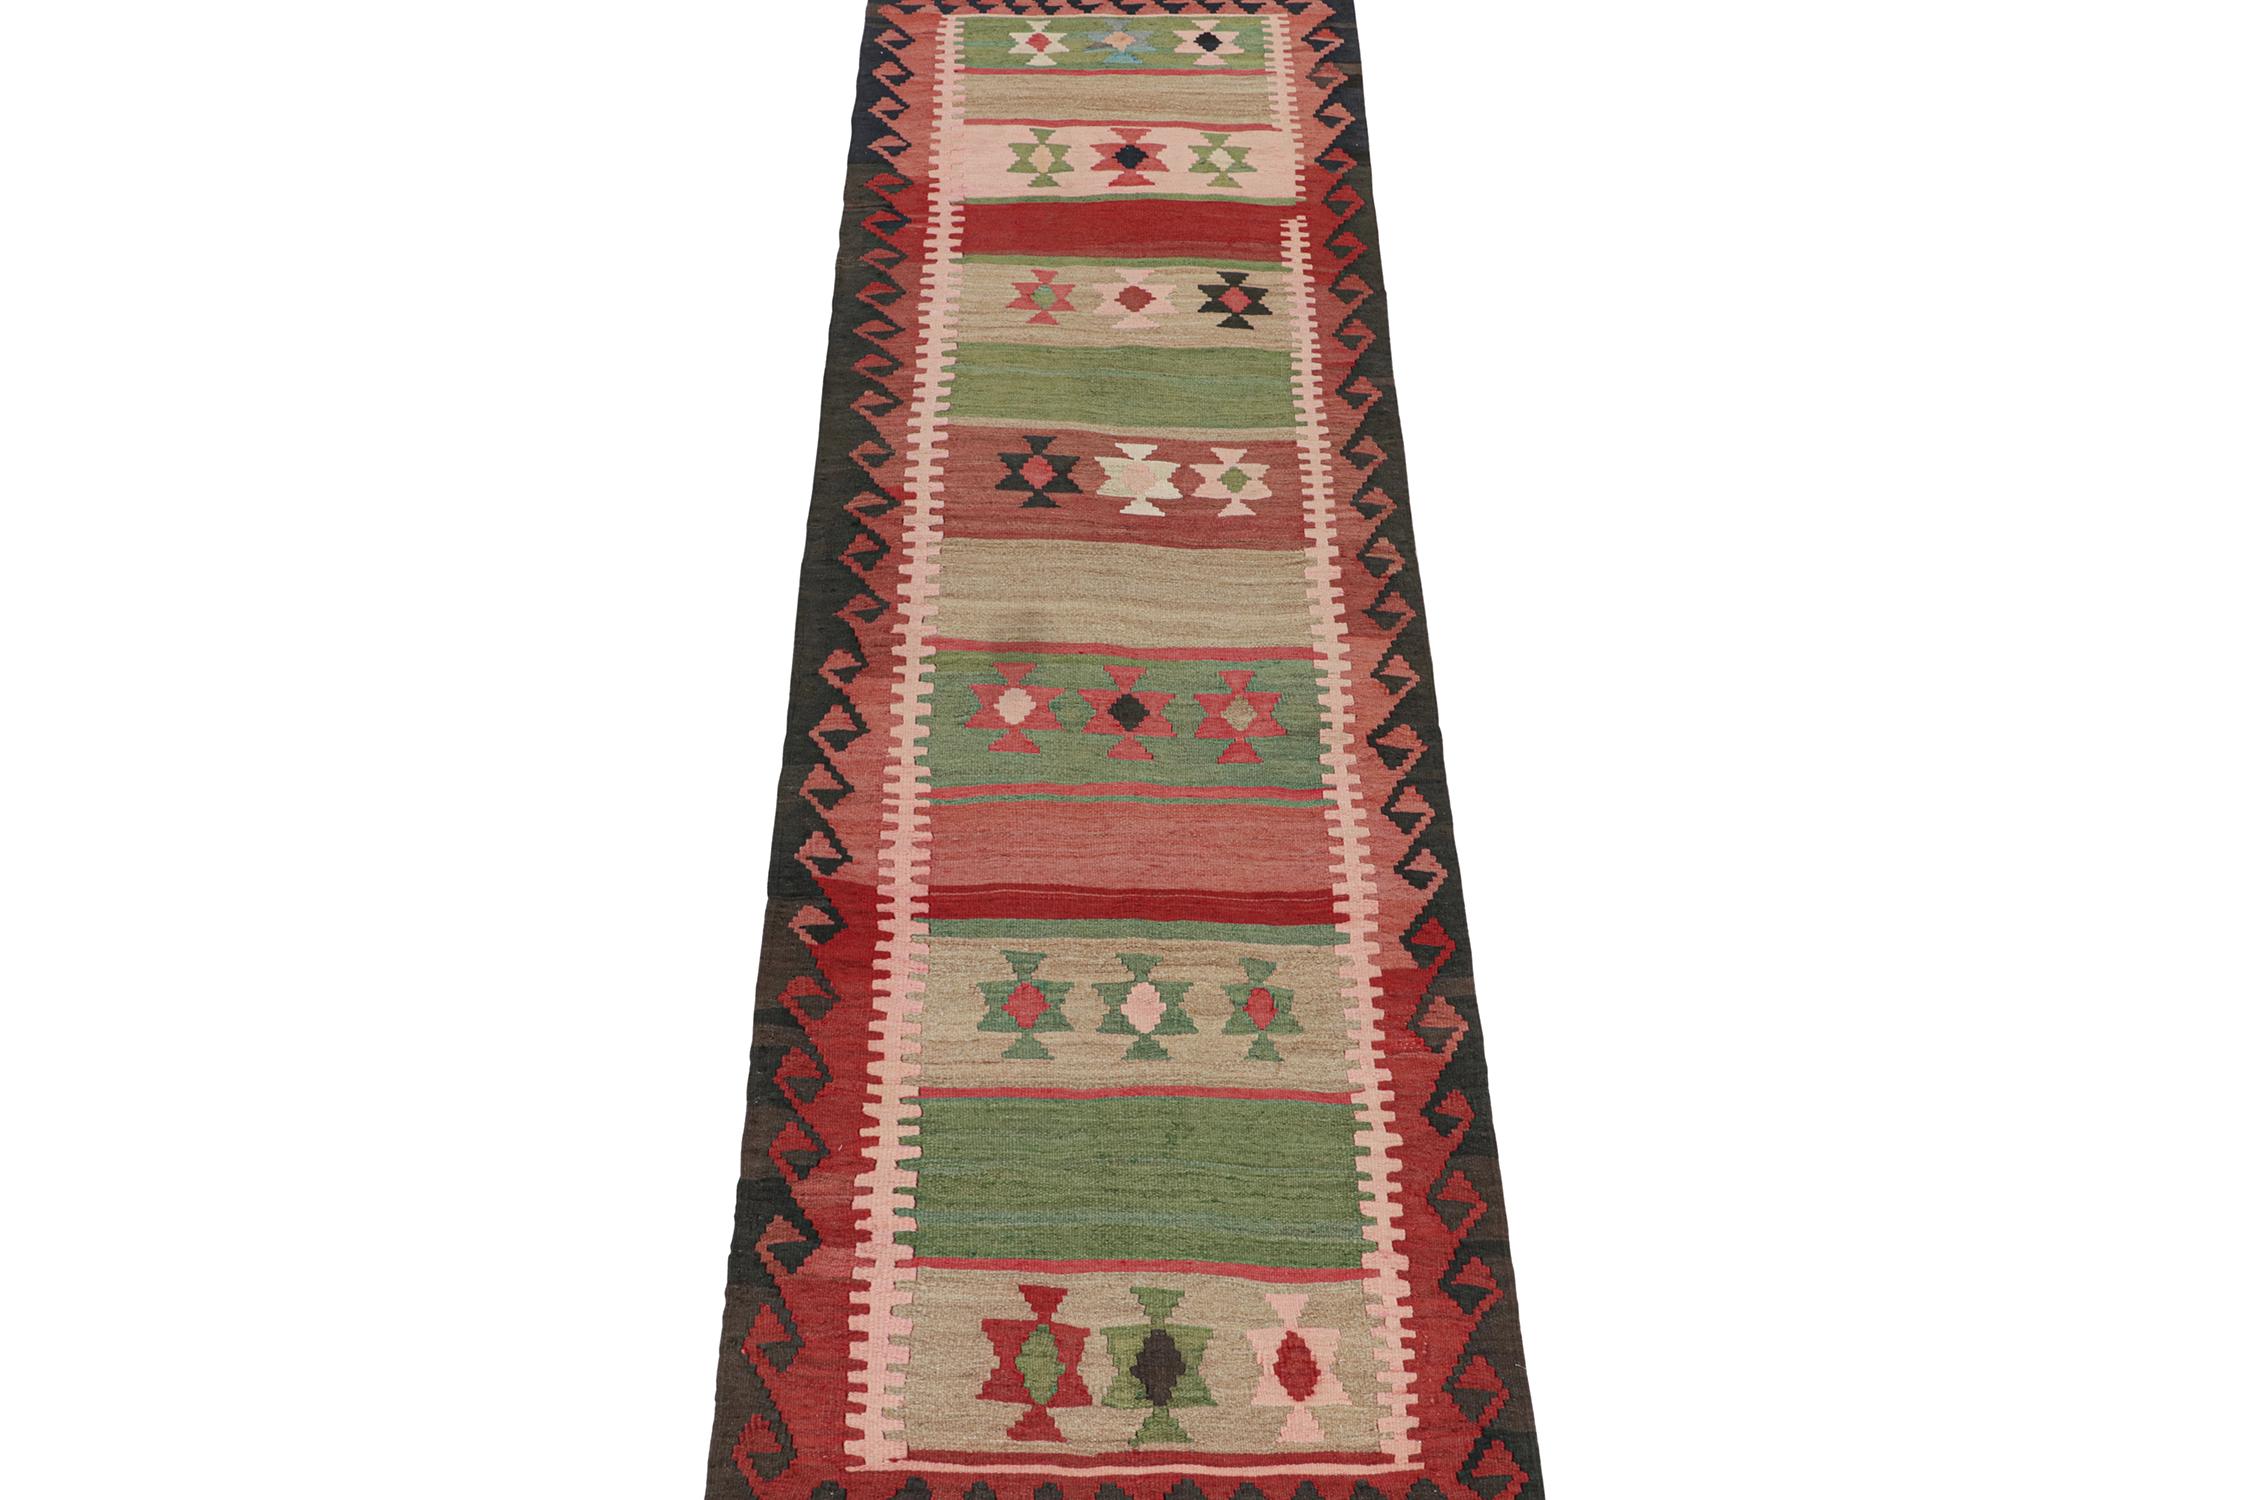 This vintage 3x12 Persian Kilim runner is handwoven in wool and originates circa 1950-1960. This Kilim is believed to hail from Meshkin—a small village known for its craft among what connoisseurs call 